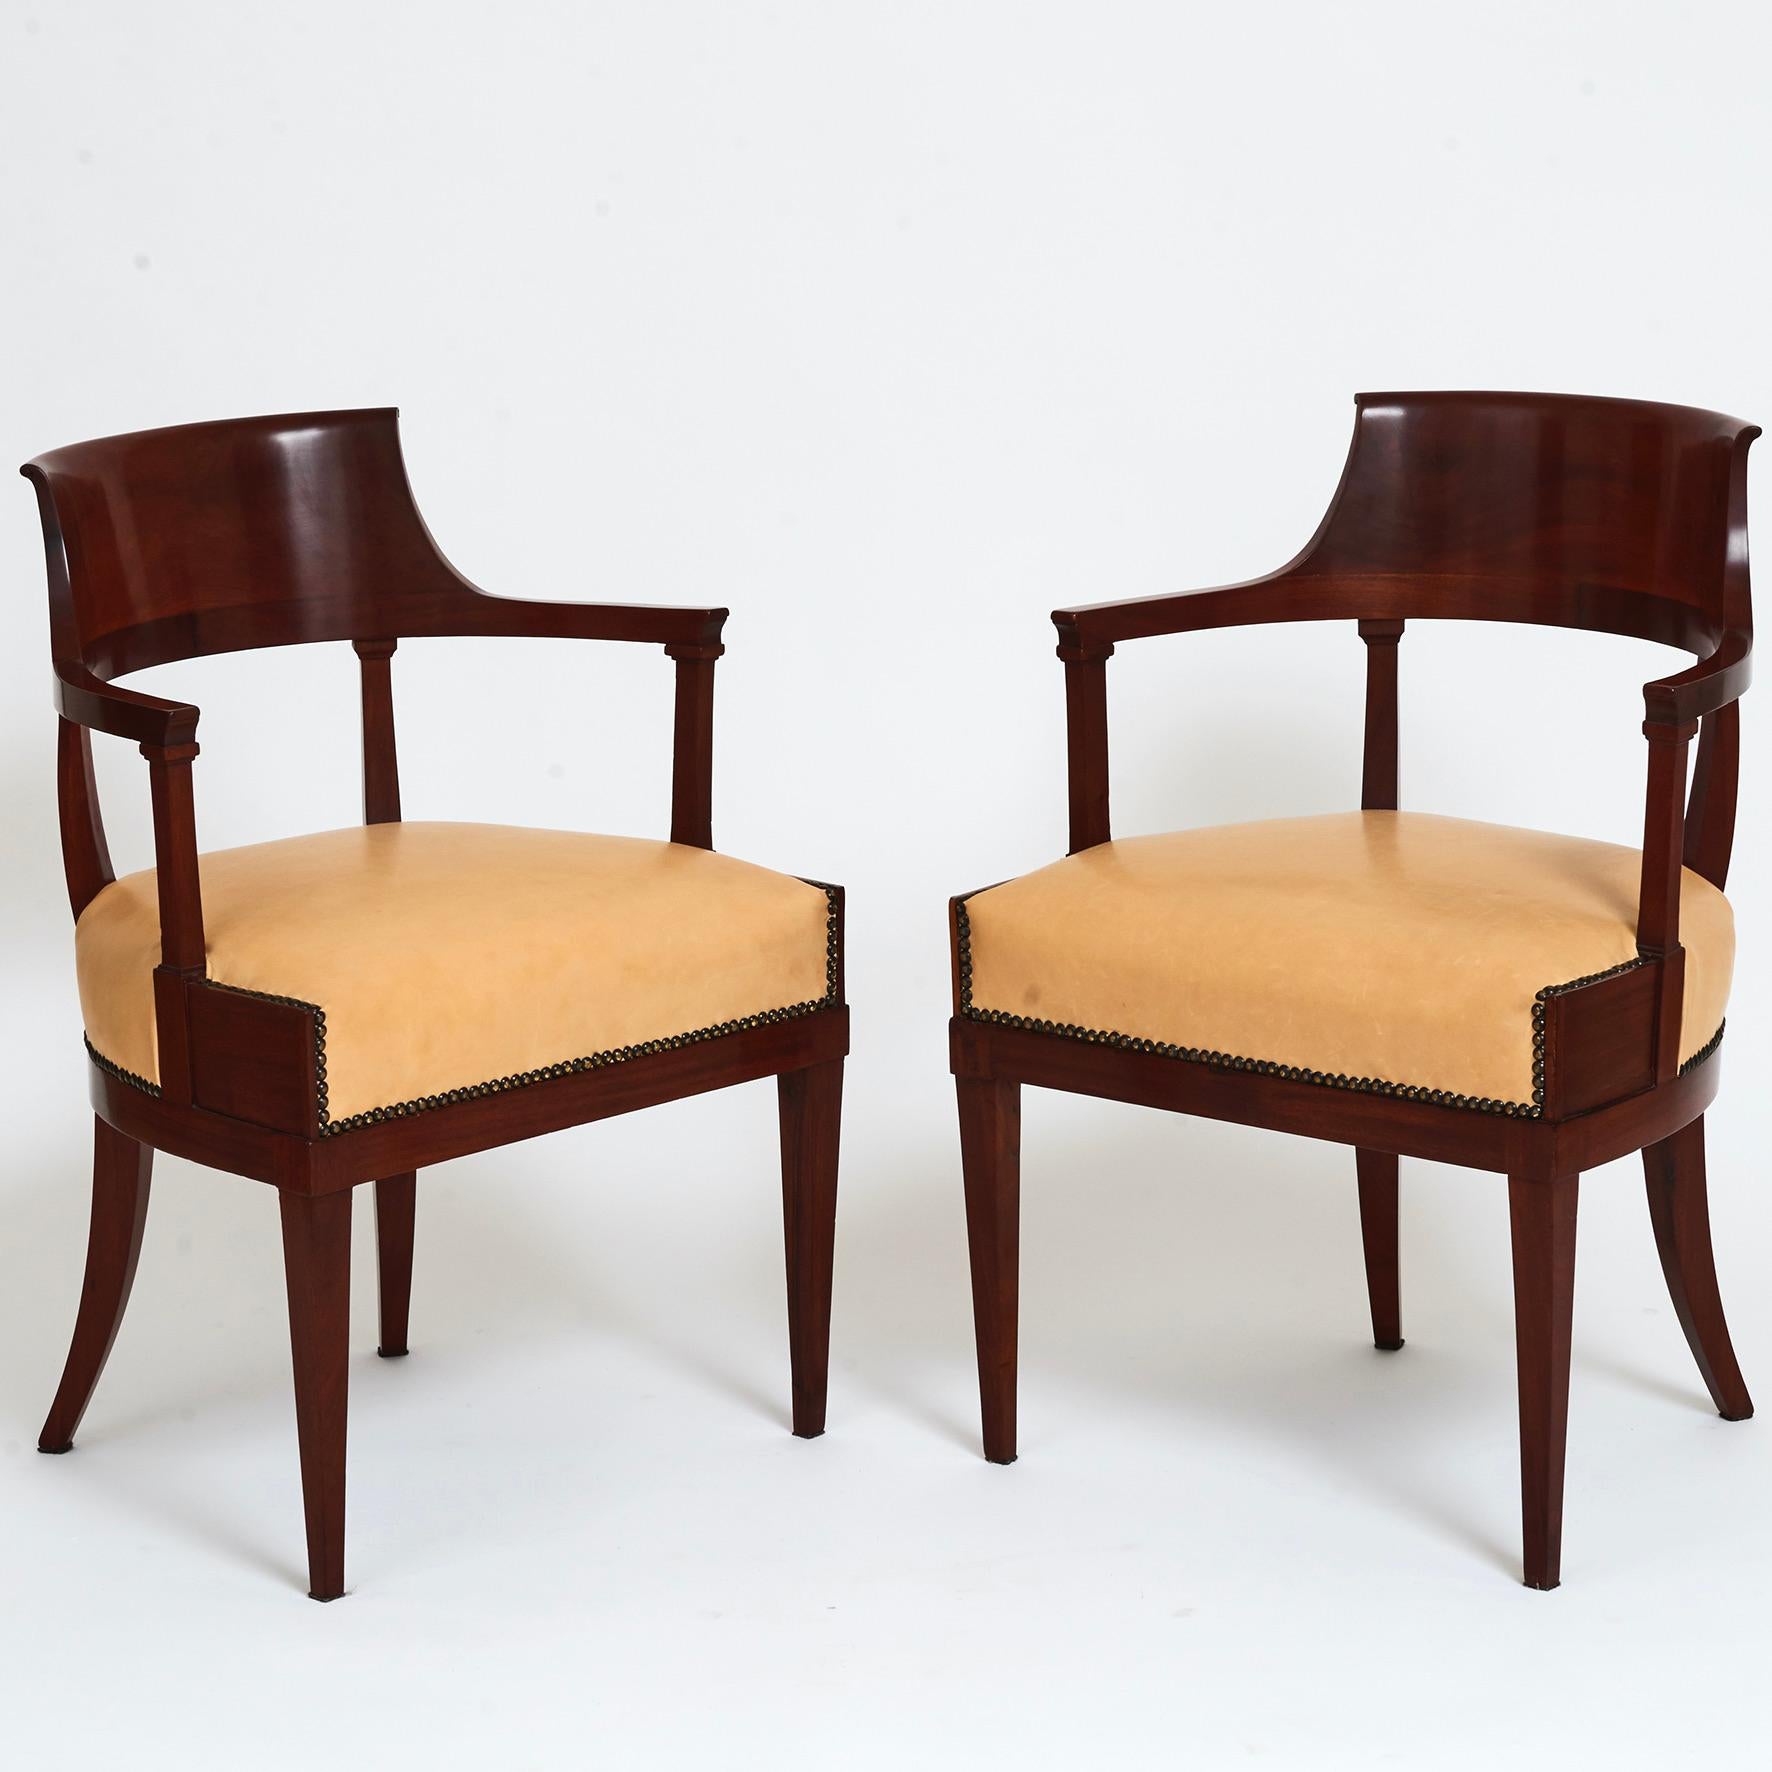 Early 19th Century Set of Three Swedish Neoclassical Armchairs, First Quarter of the 19th Century